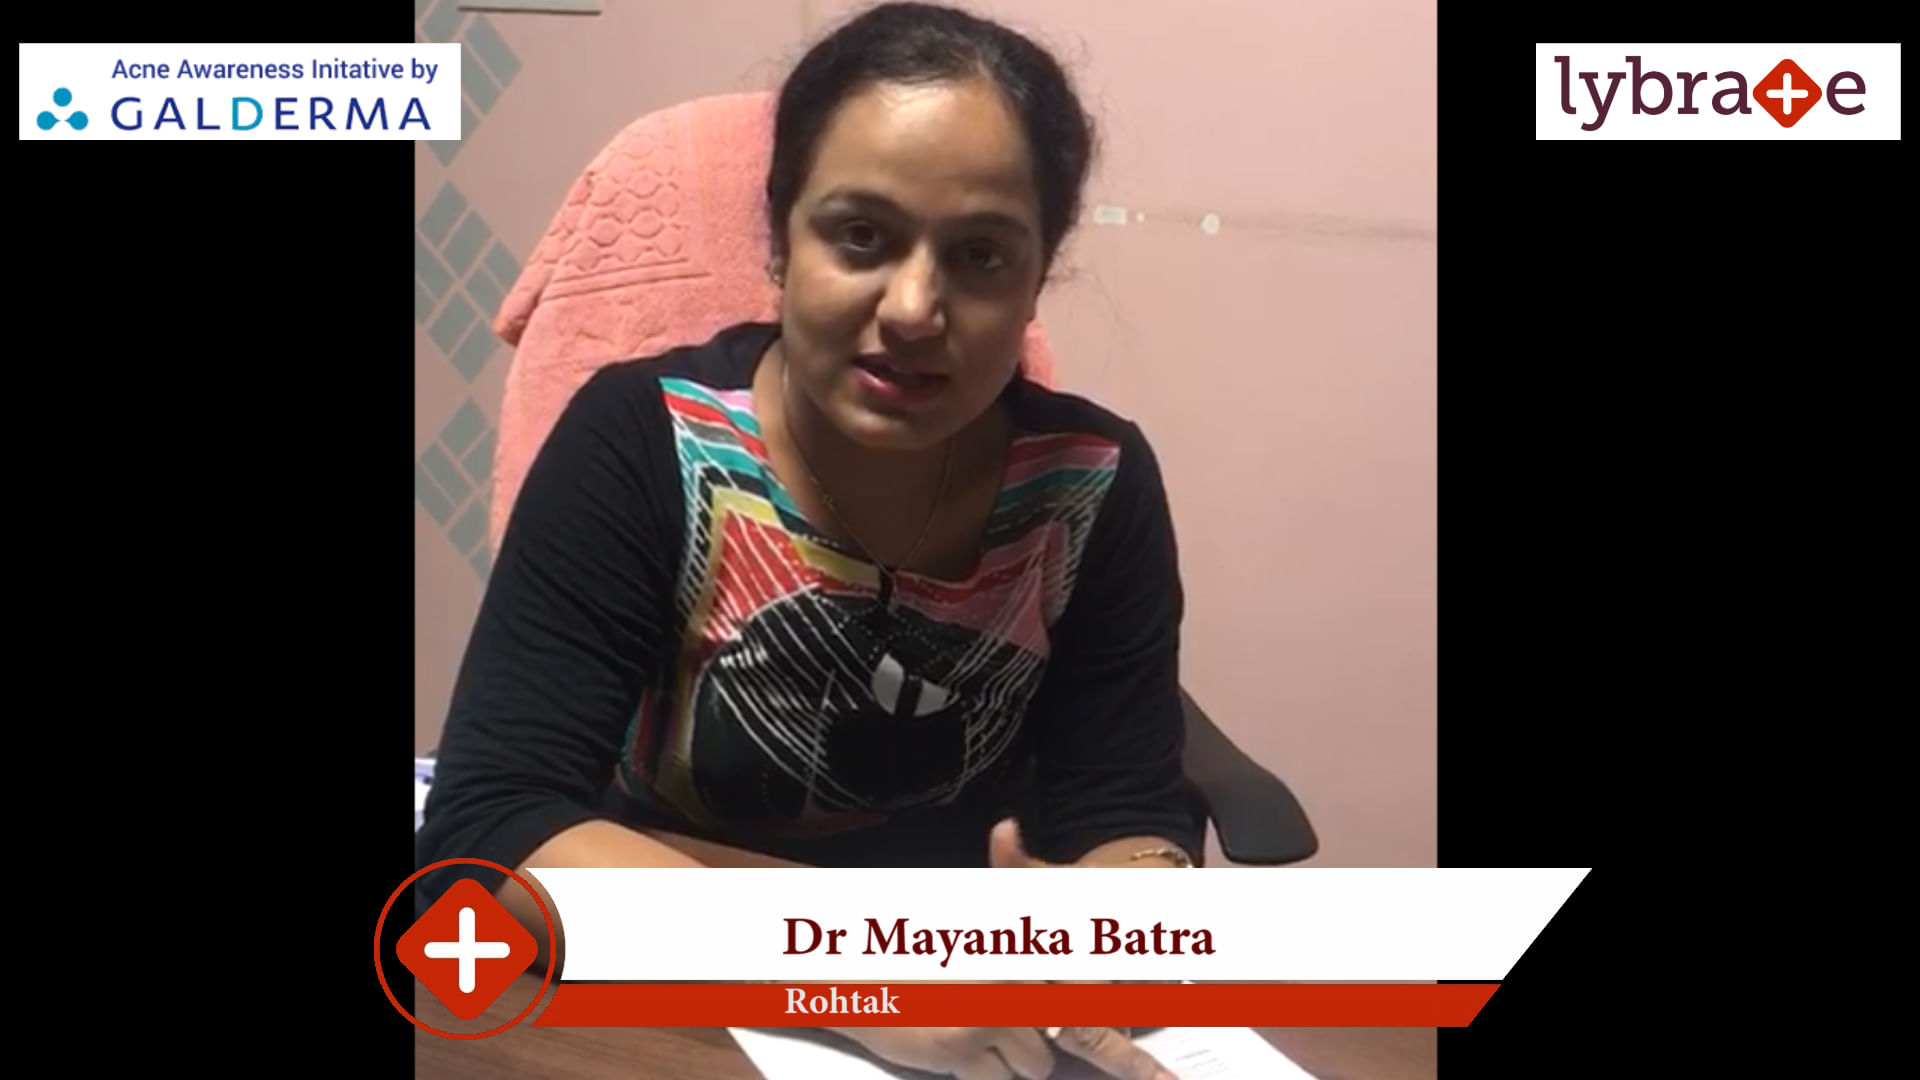 Lybrate | Dr. Mayanka Batra speaks on IMPORTANCE OF TREATING ACNE EARLY